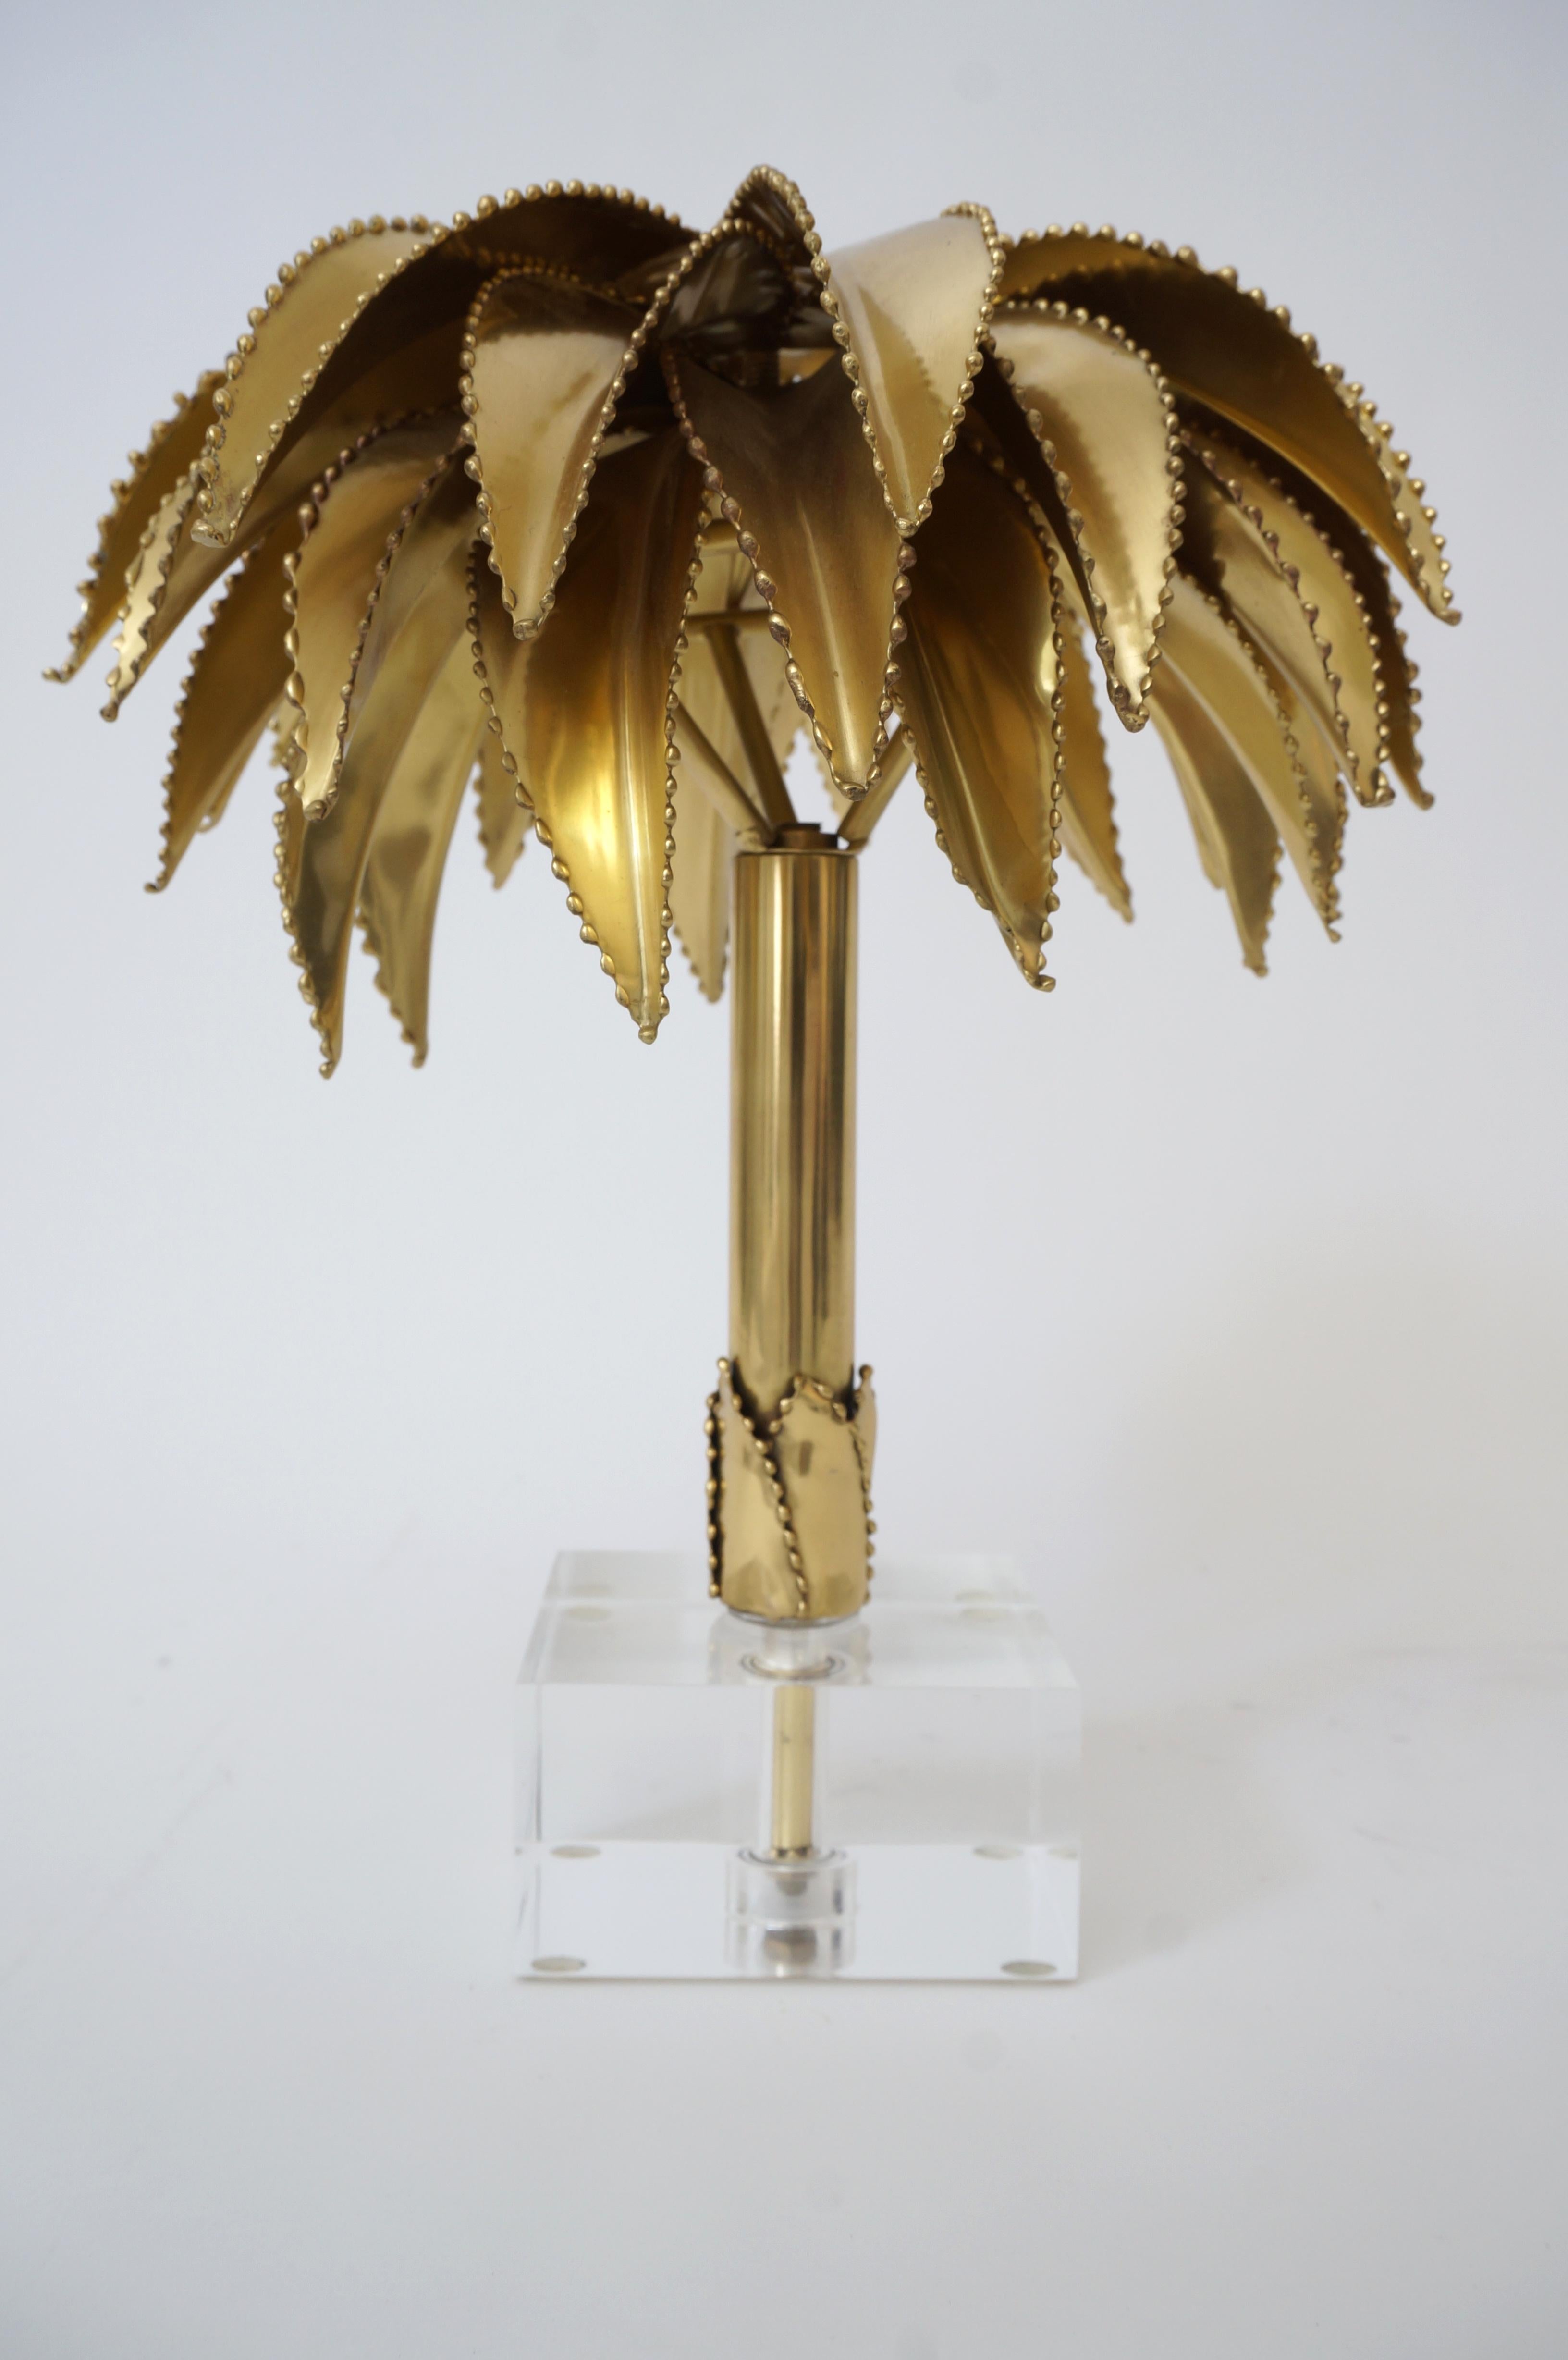 Hand-Crafted Royal Palm Tree by Maison Jansen